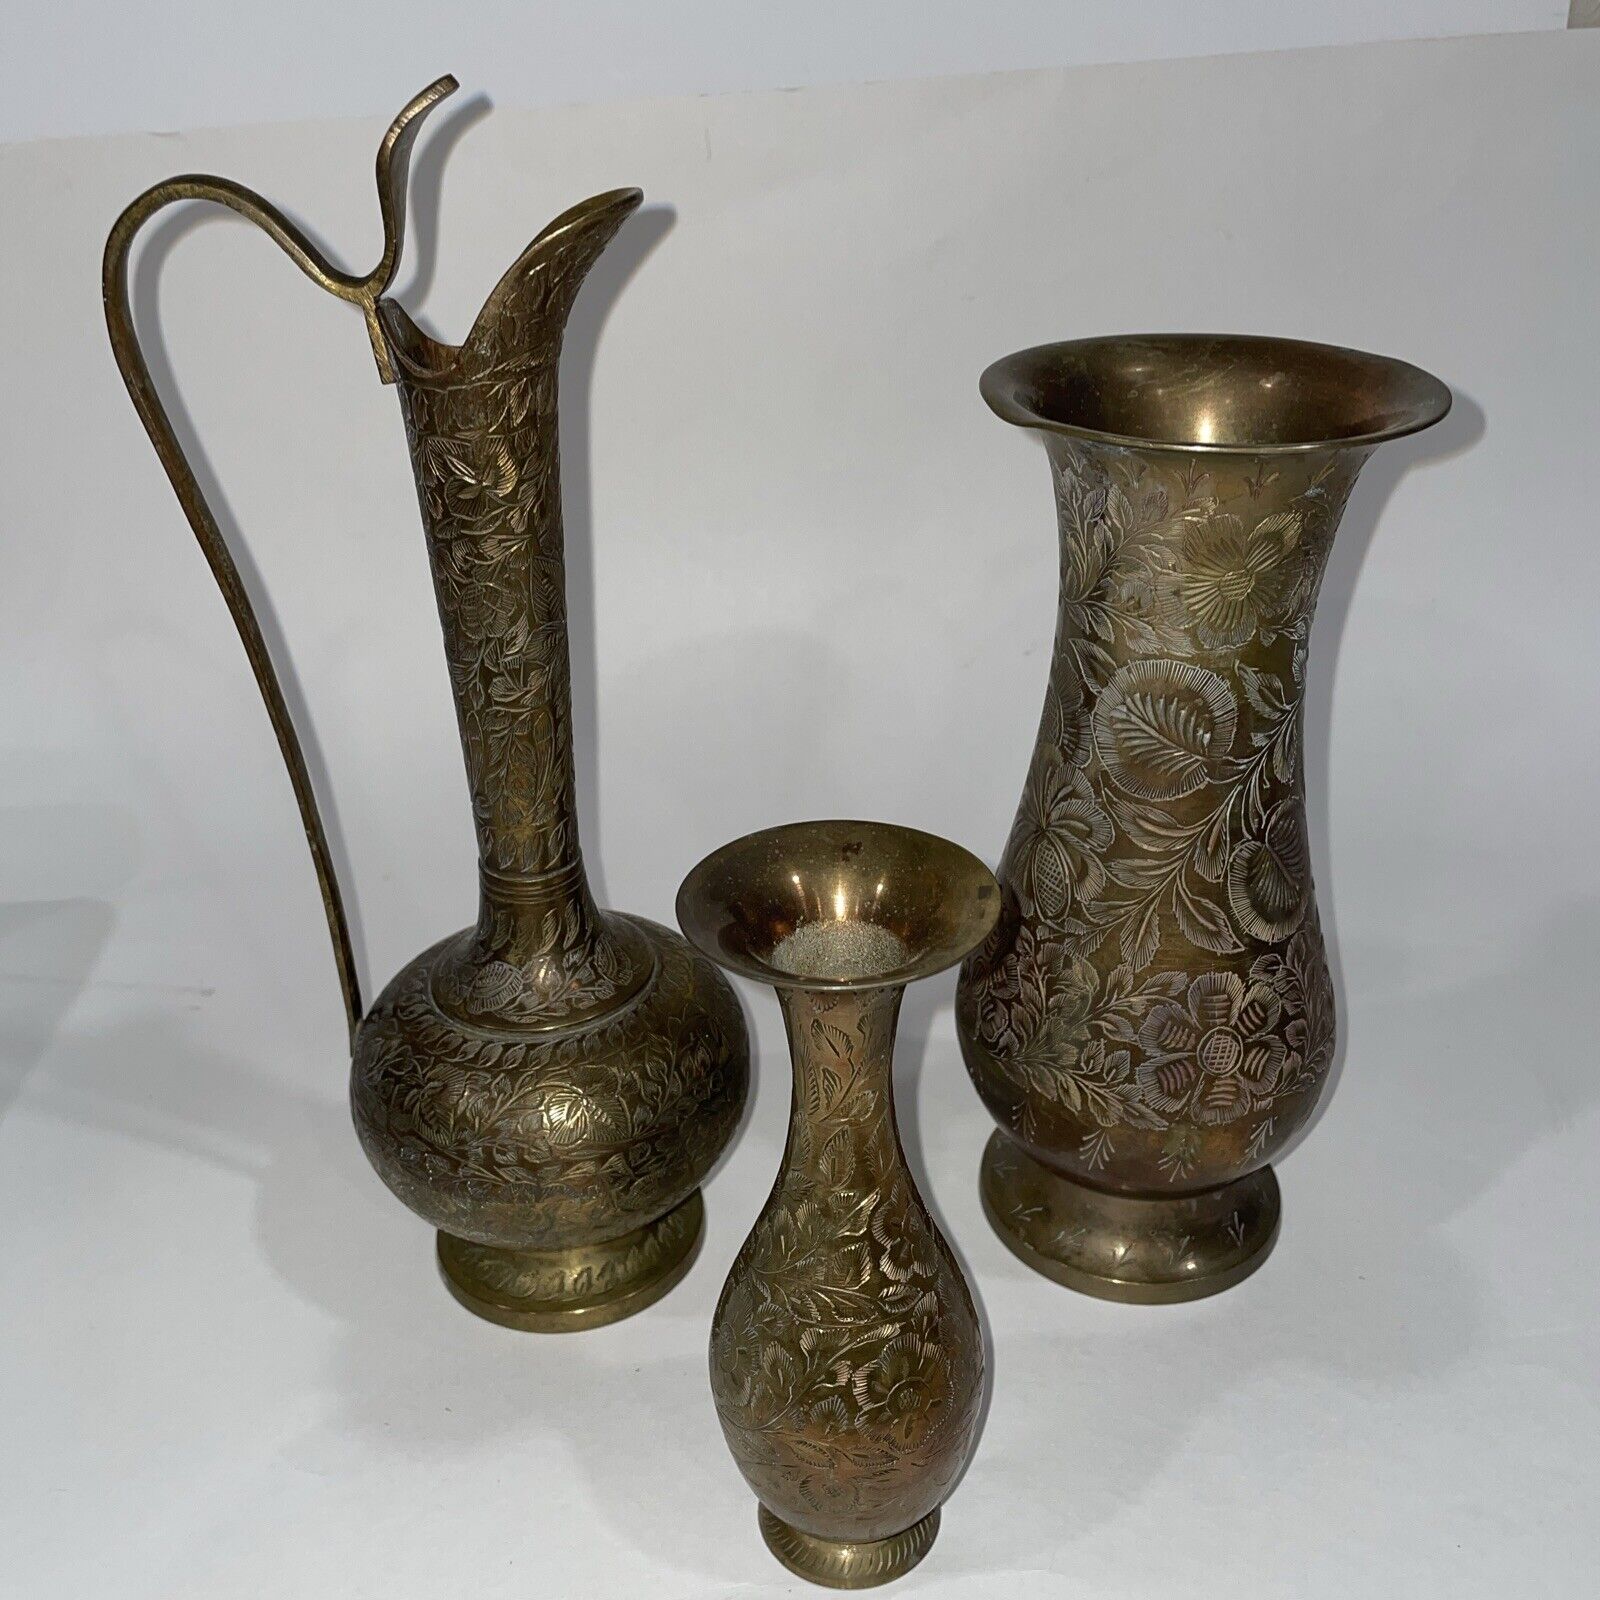 Lot of 3 Vintage Rare Brass Engraved Pitcher & 2 Vases, Etched, Made in India